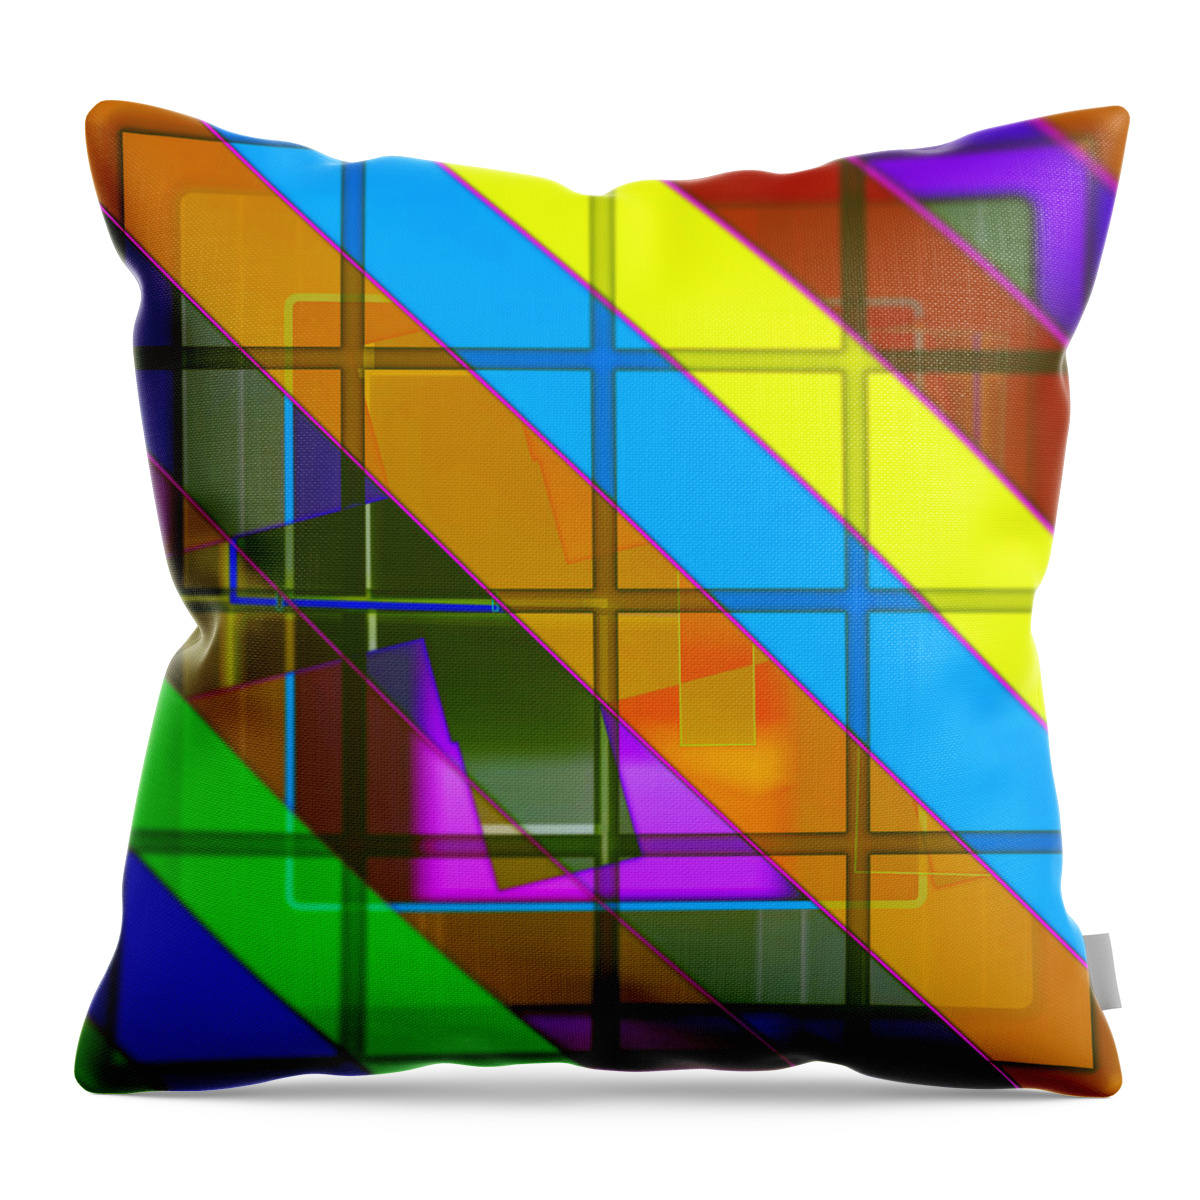 Abstract Throw Pillow featuring the digital art Pattern 51 by Marko Sabotin